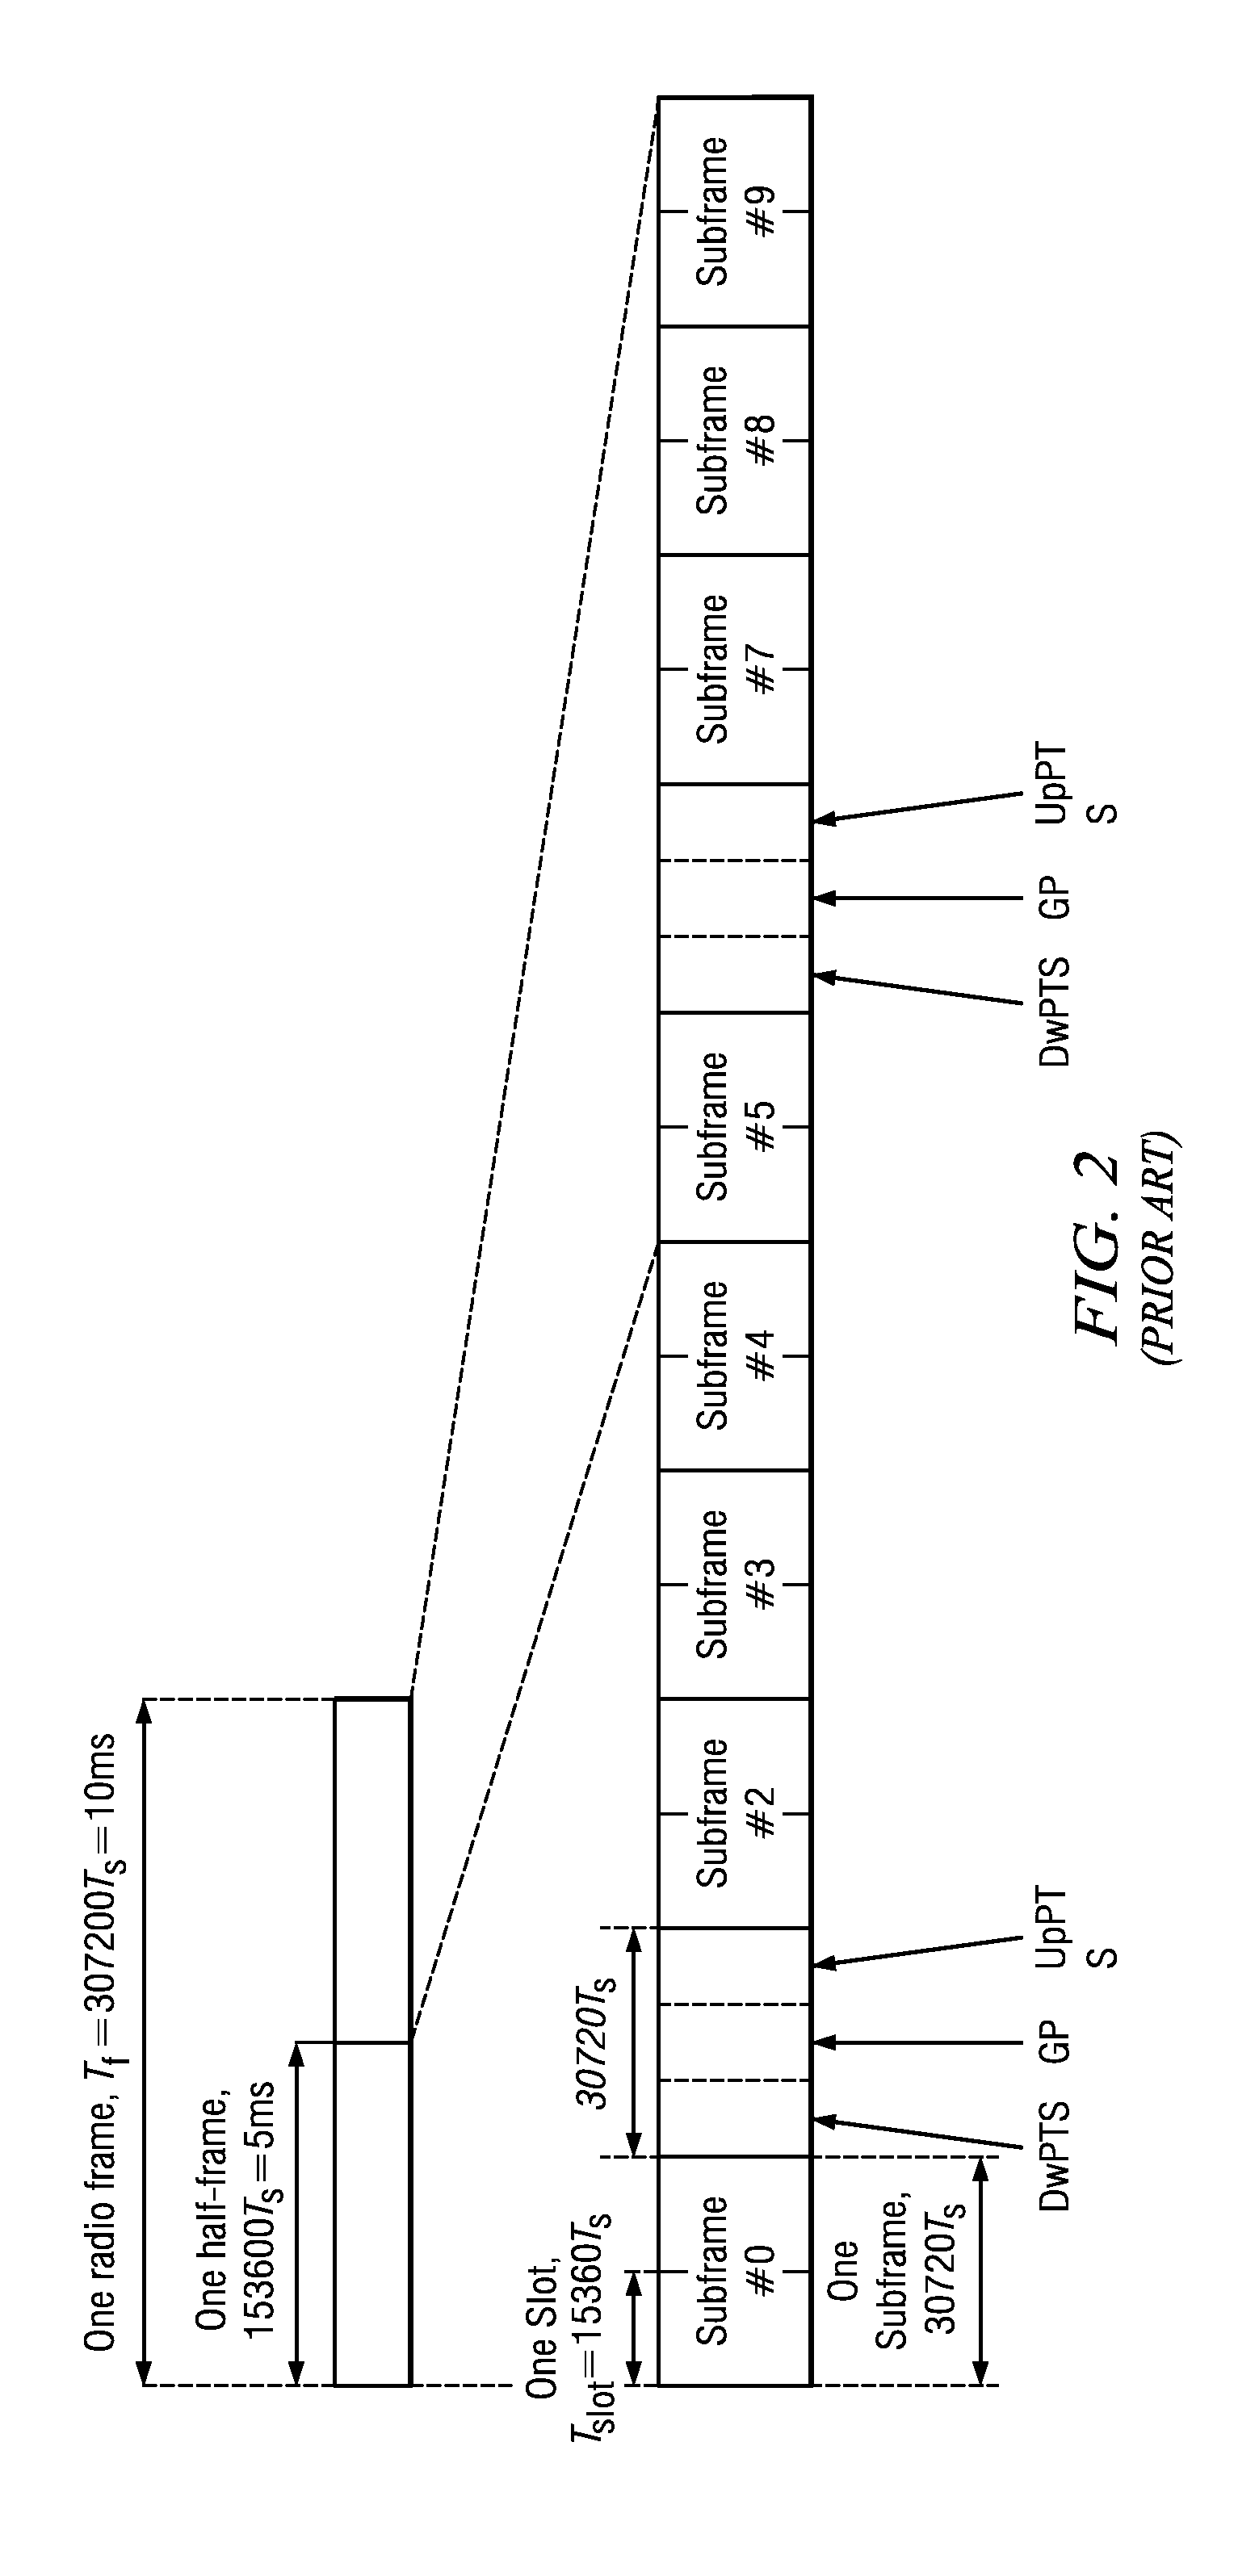 Transmission Modes and Signaling for Uplink MIMO Support or Single TB Dual-Layer Transmission in LTE Uplink